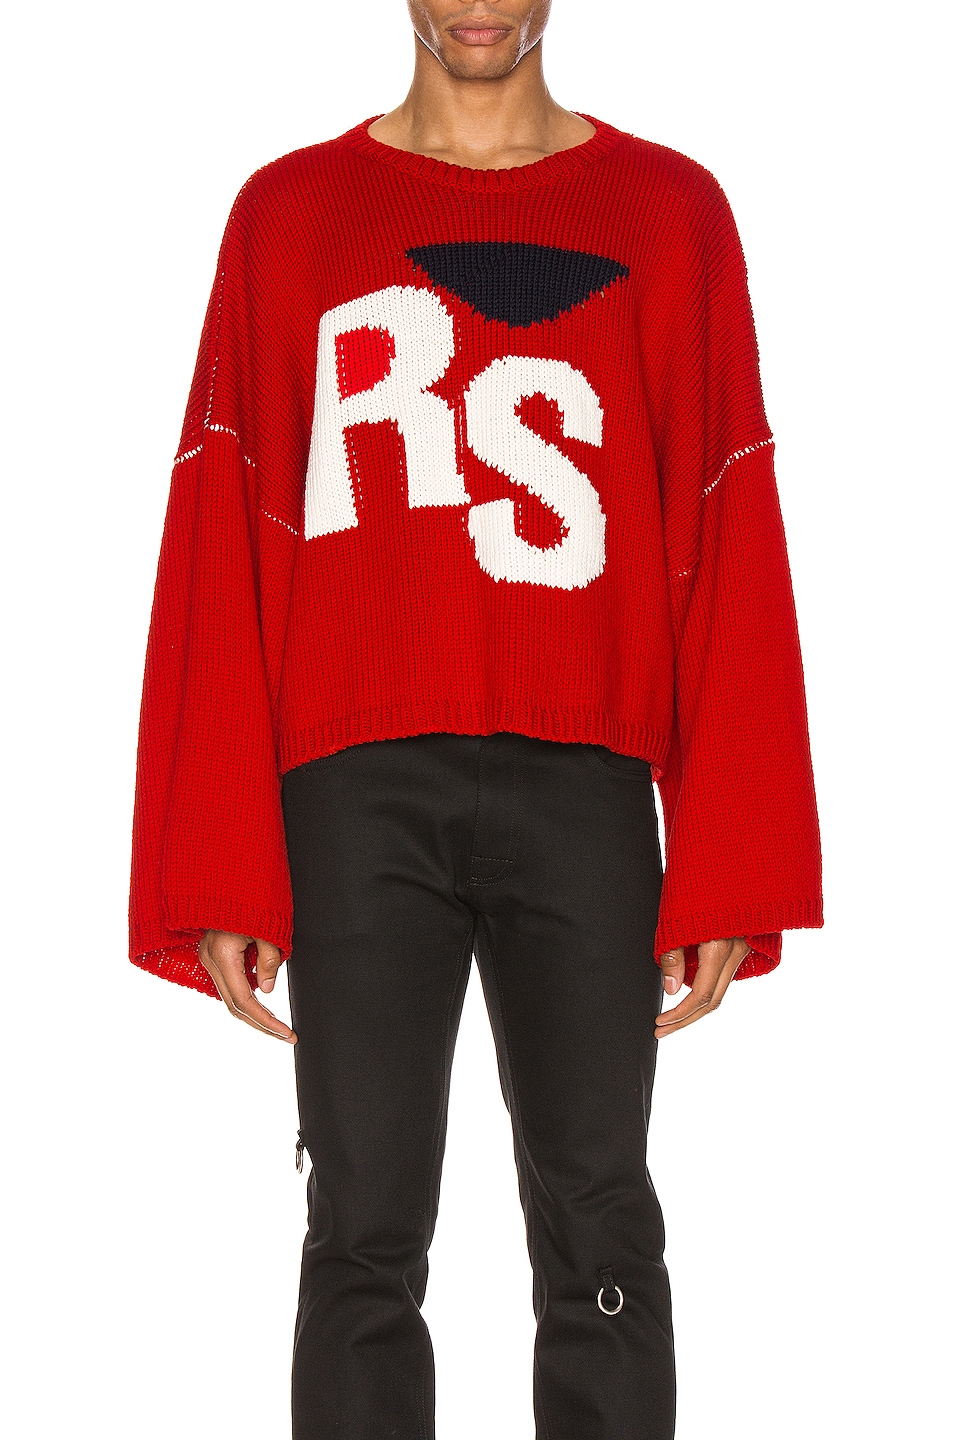 Raf Simons Cropped Oversized RS Sweater